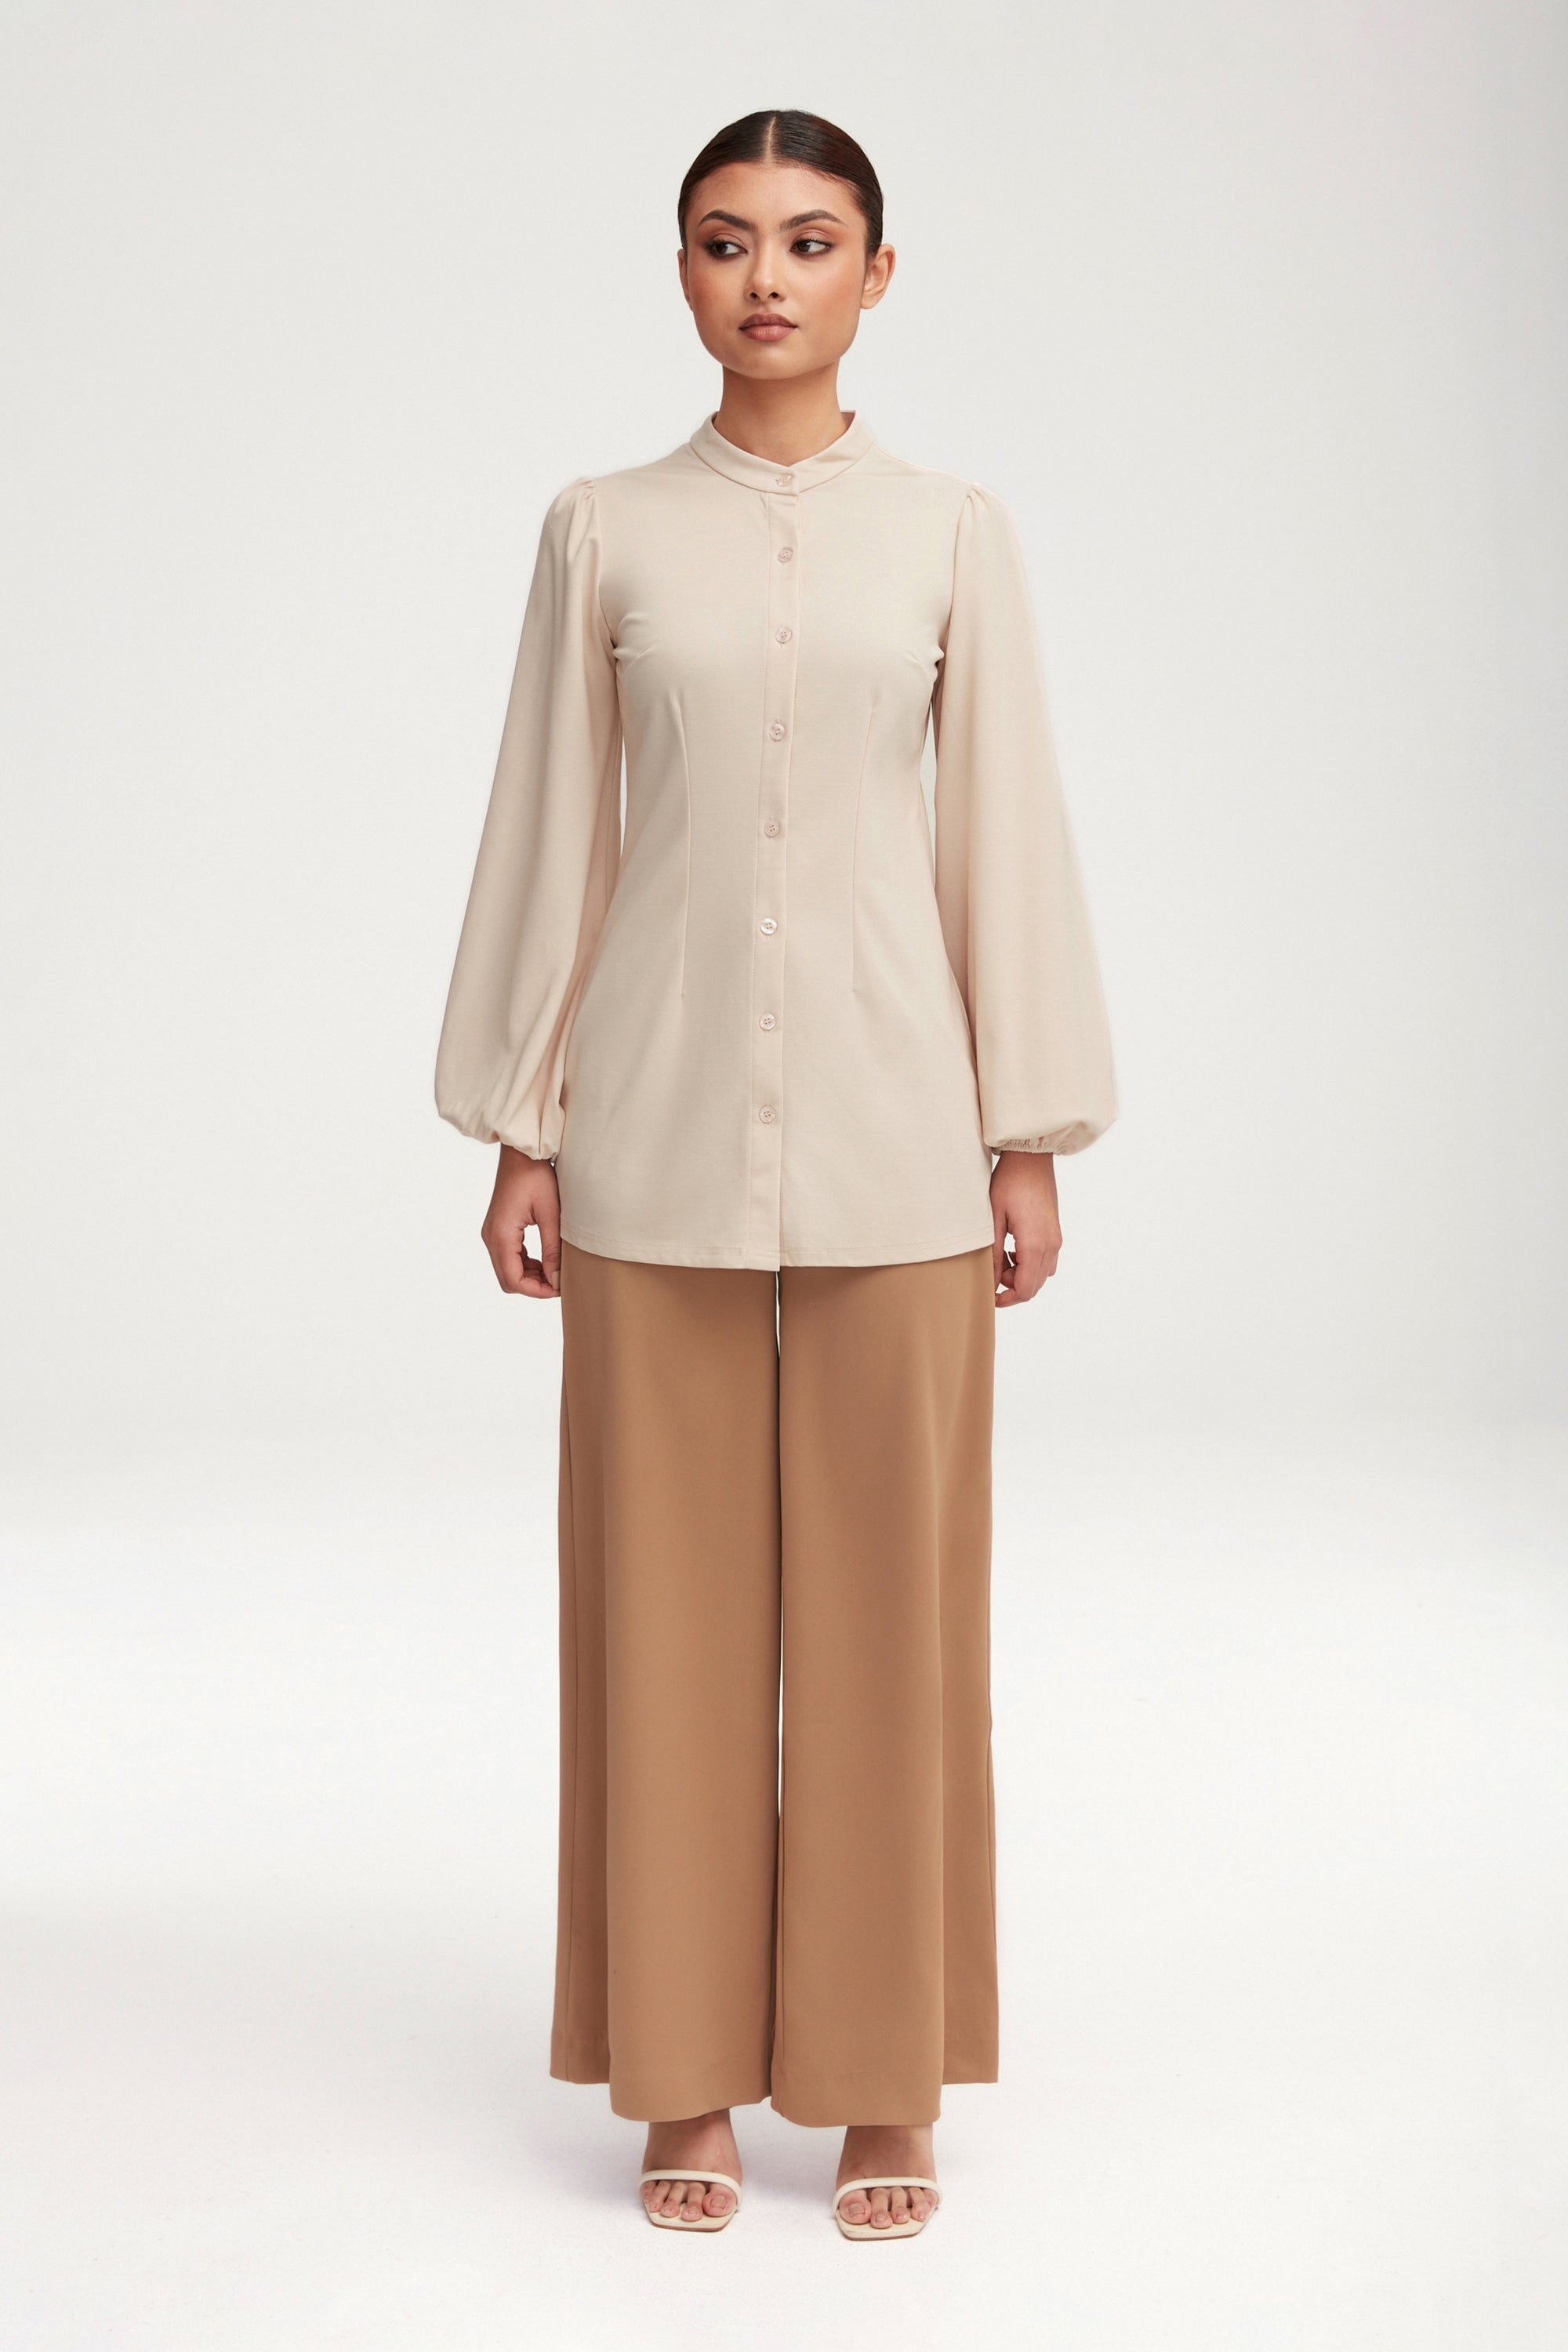 Rayana Jersey Button Down Top - Light Sand Clothing epschoolboard 